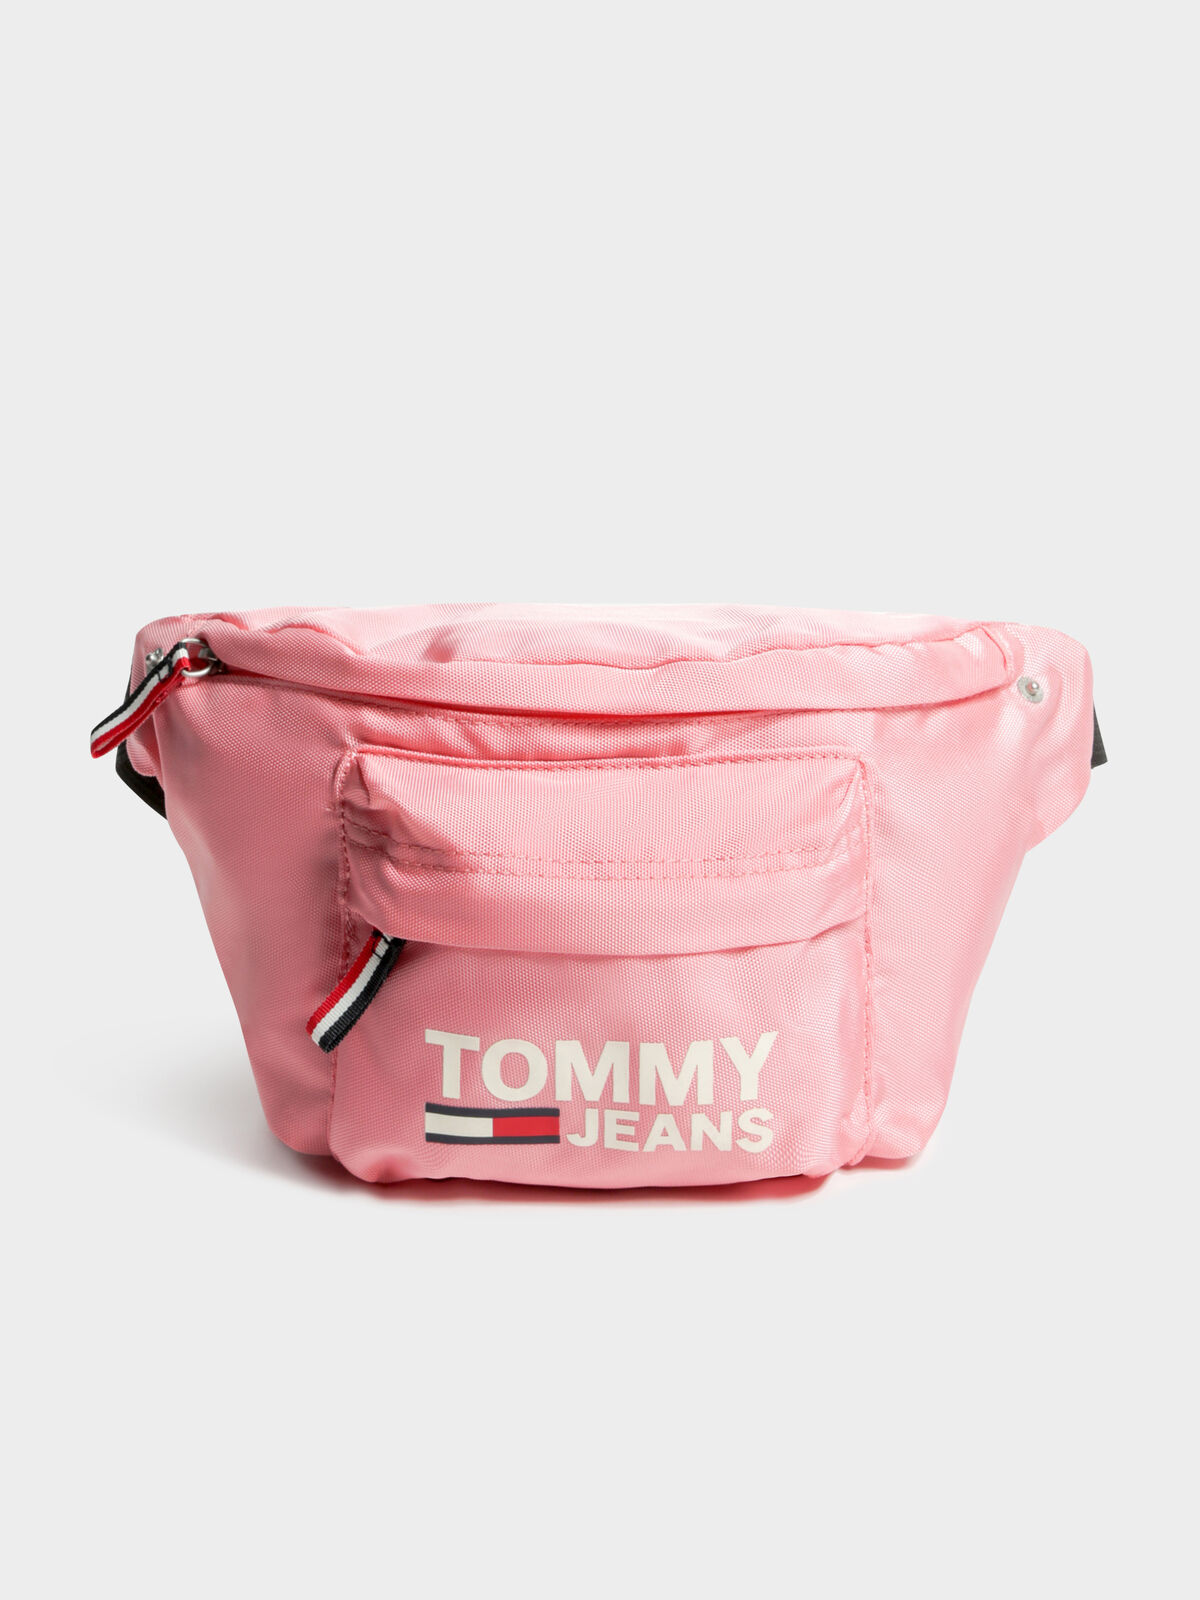 Cool City Bumbag in Pink Icing